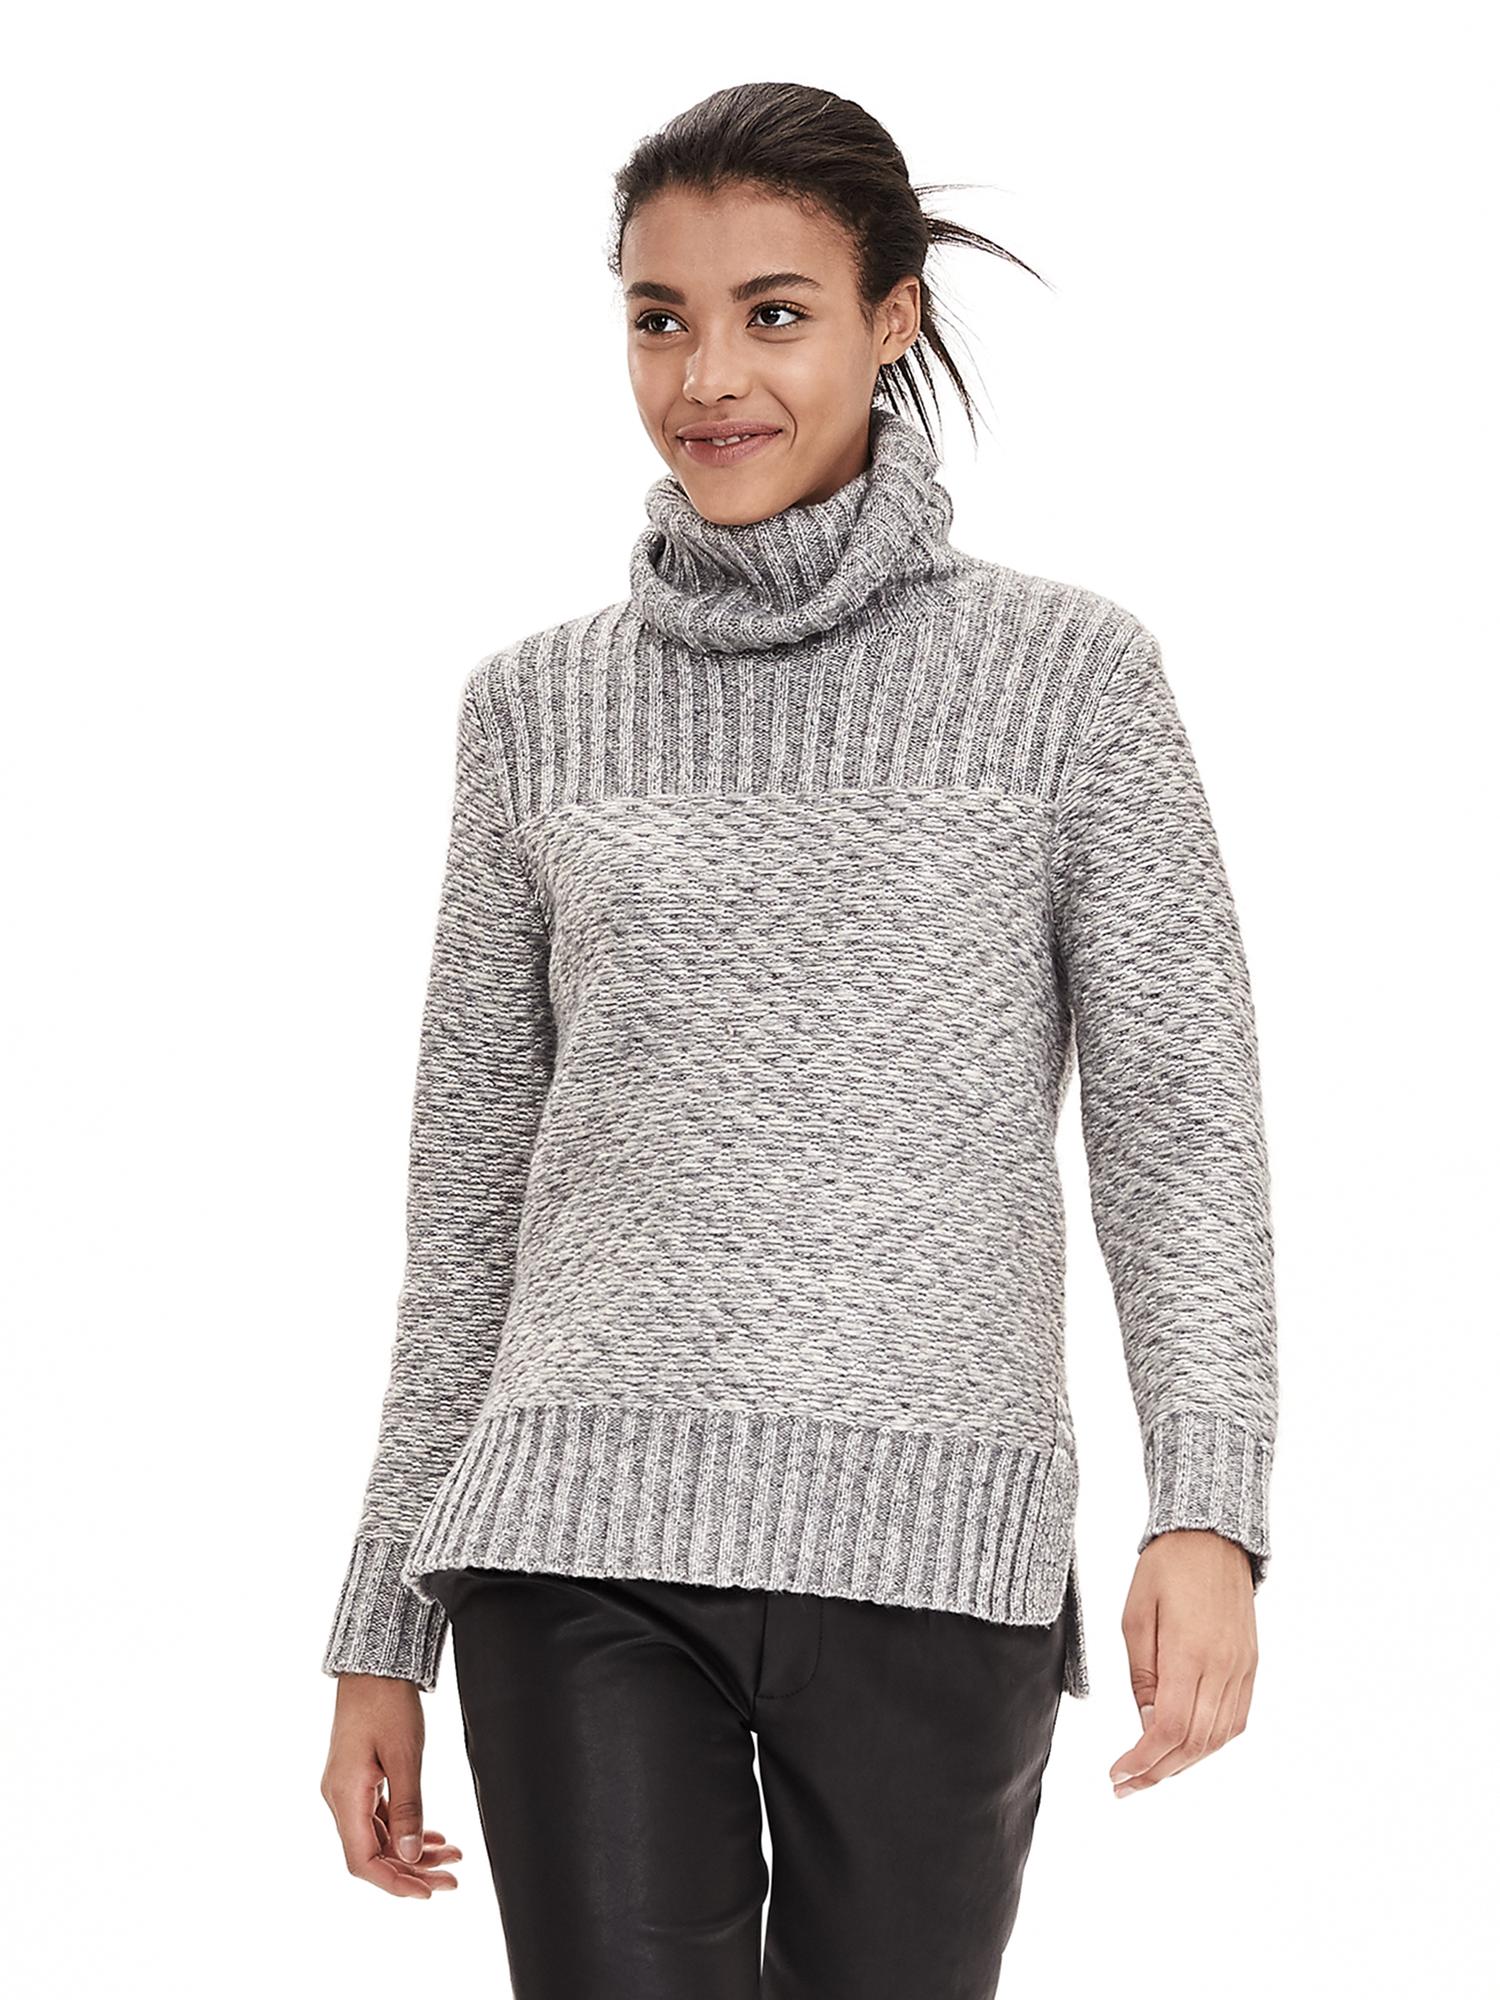 Two-Tone High/Low Turtleneck Pullover | Banana Republic